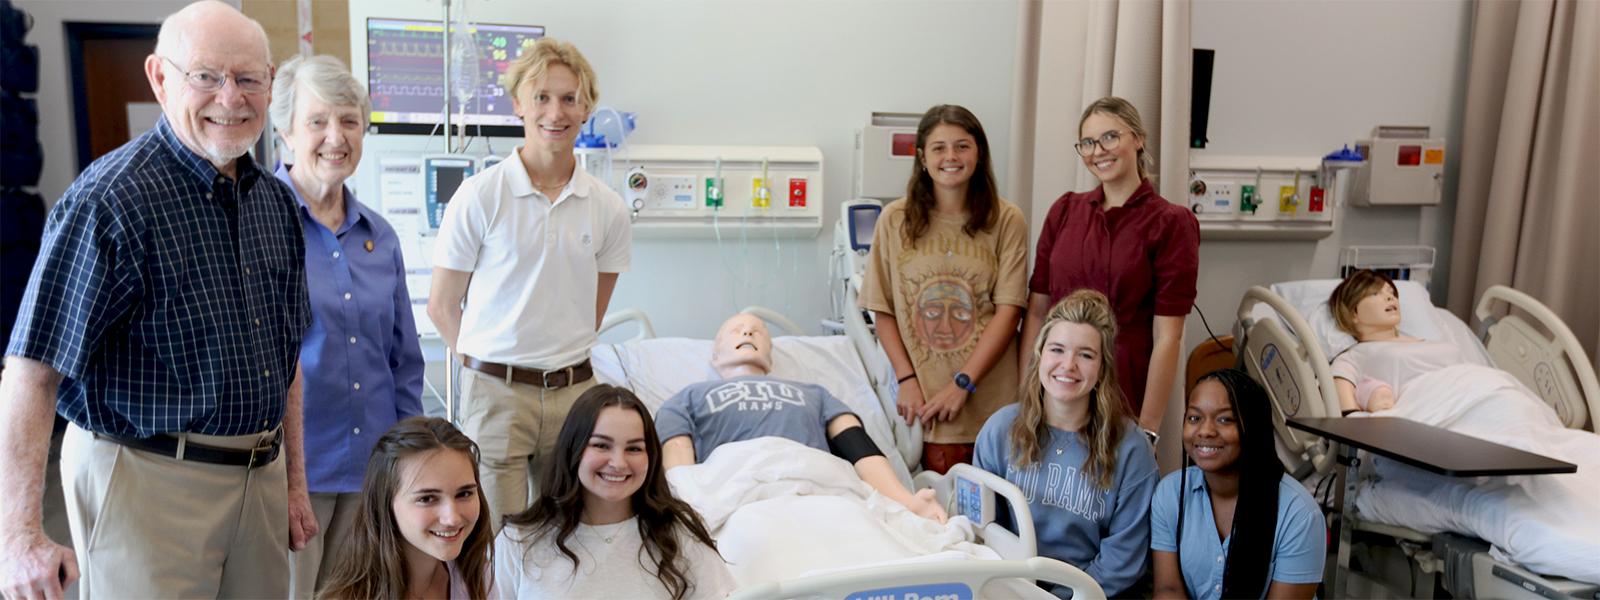 Dr. Johnny Miller and his wife Jeanne pose with CIU nursing students in the Jeanne Miller Simulation Center